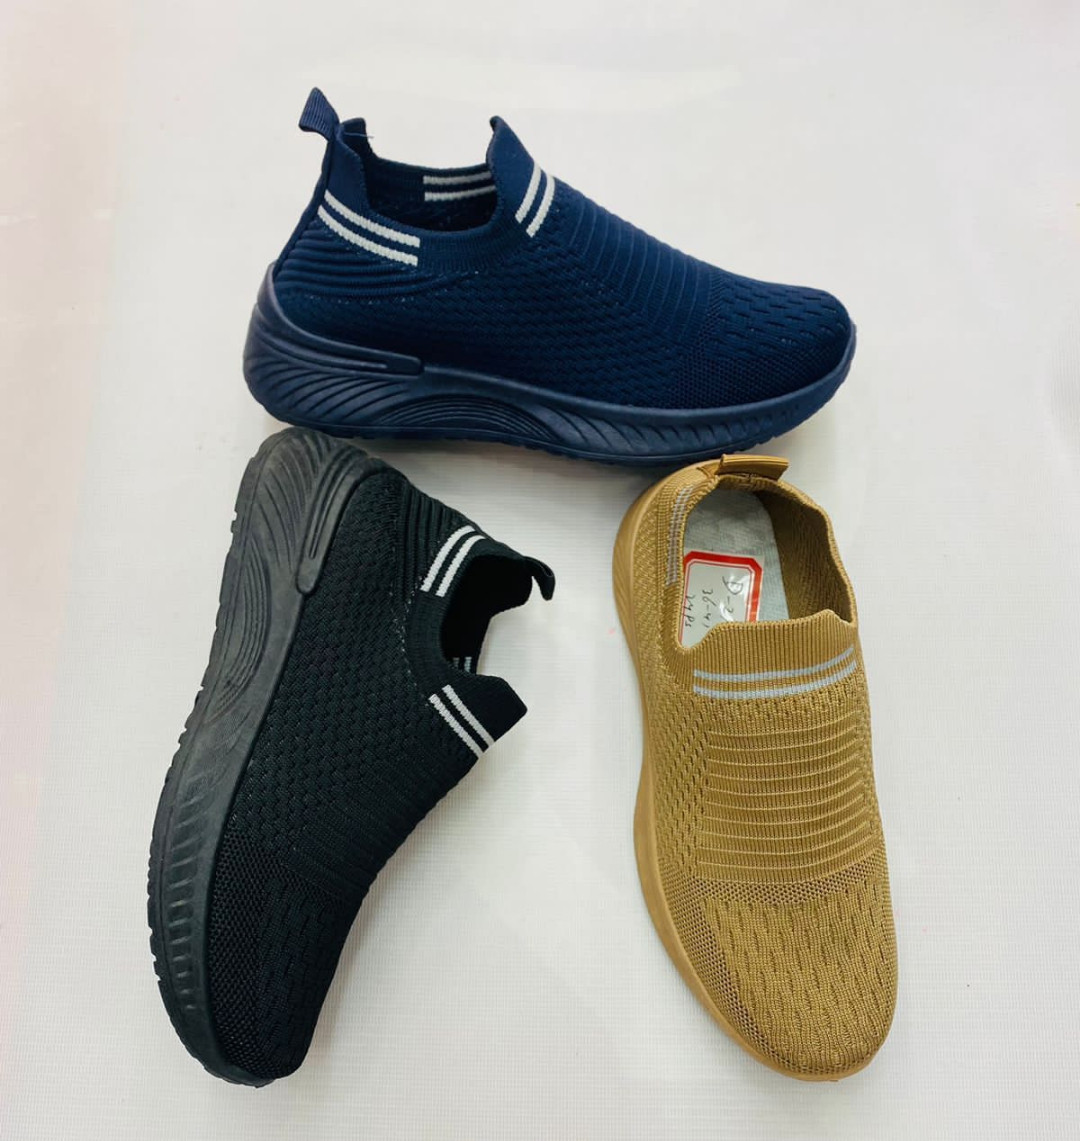 High-end breathable sponge cake Slip-On Shoes For Women and Girls Premium quality Fashion shoes Women Dark Blue - Black - Beige (24 pairs in one BOX) Size 36 to 41